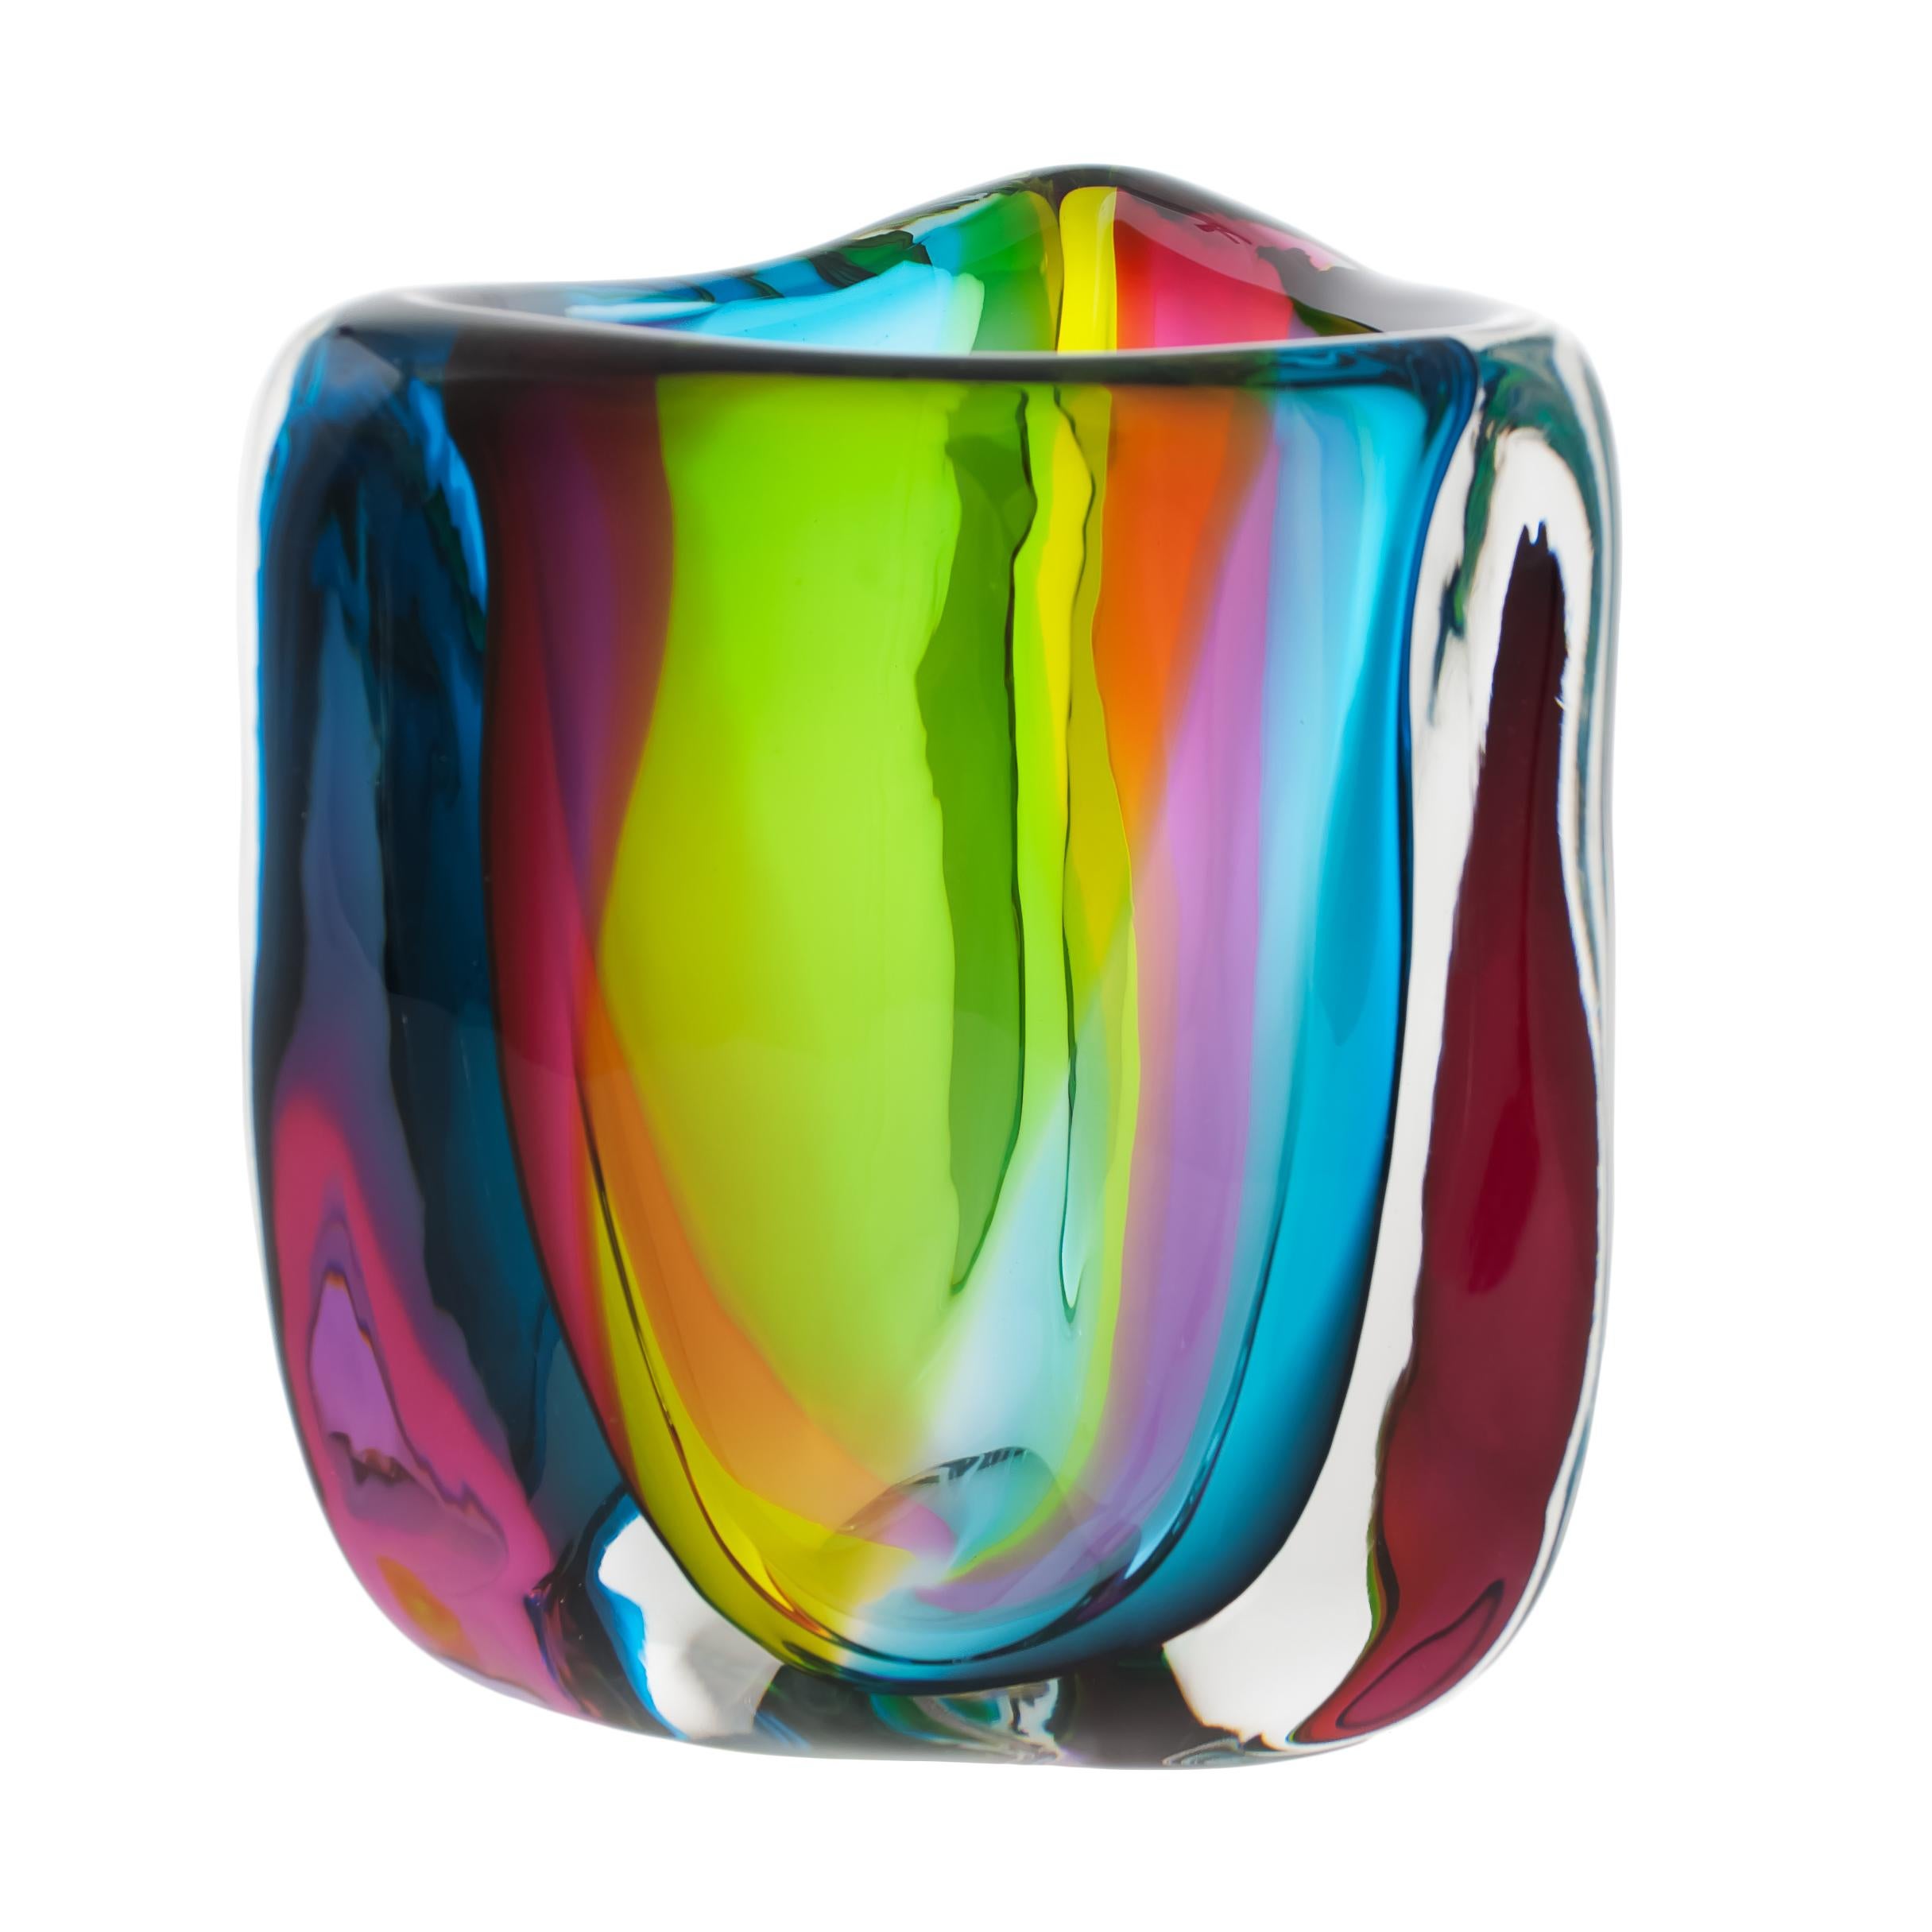 Modern Glass Vase, Chroma Low Triangle by Siemon & Salazar - Made to Order